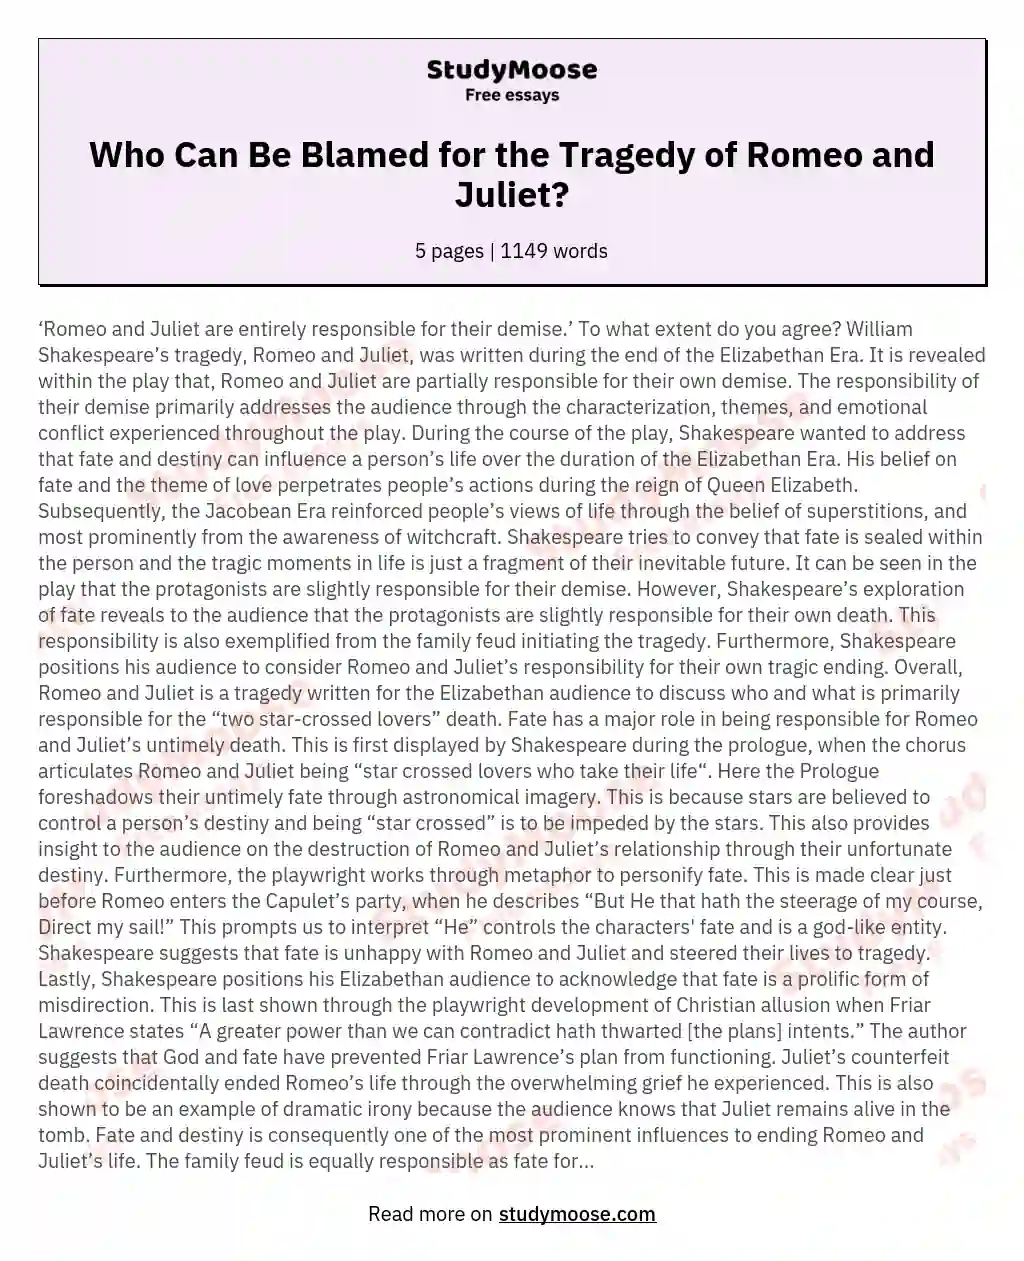 Who Can Be Blamed for the Tragedy of Romeo and Juliet?